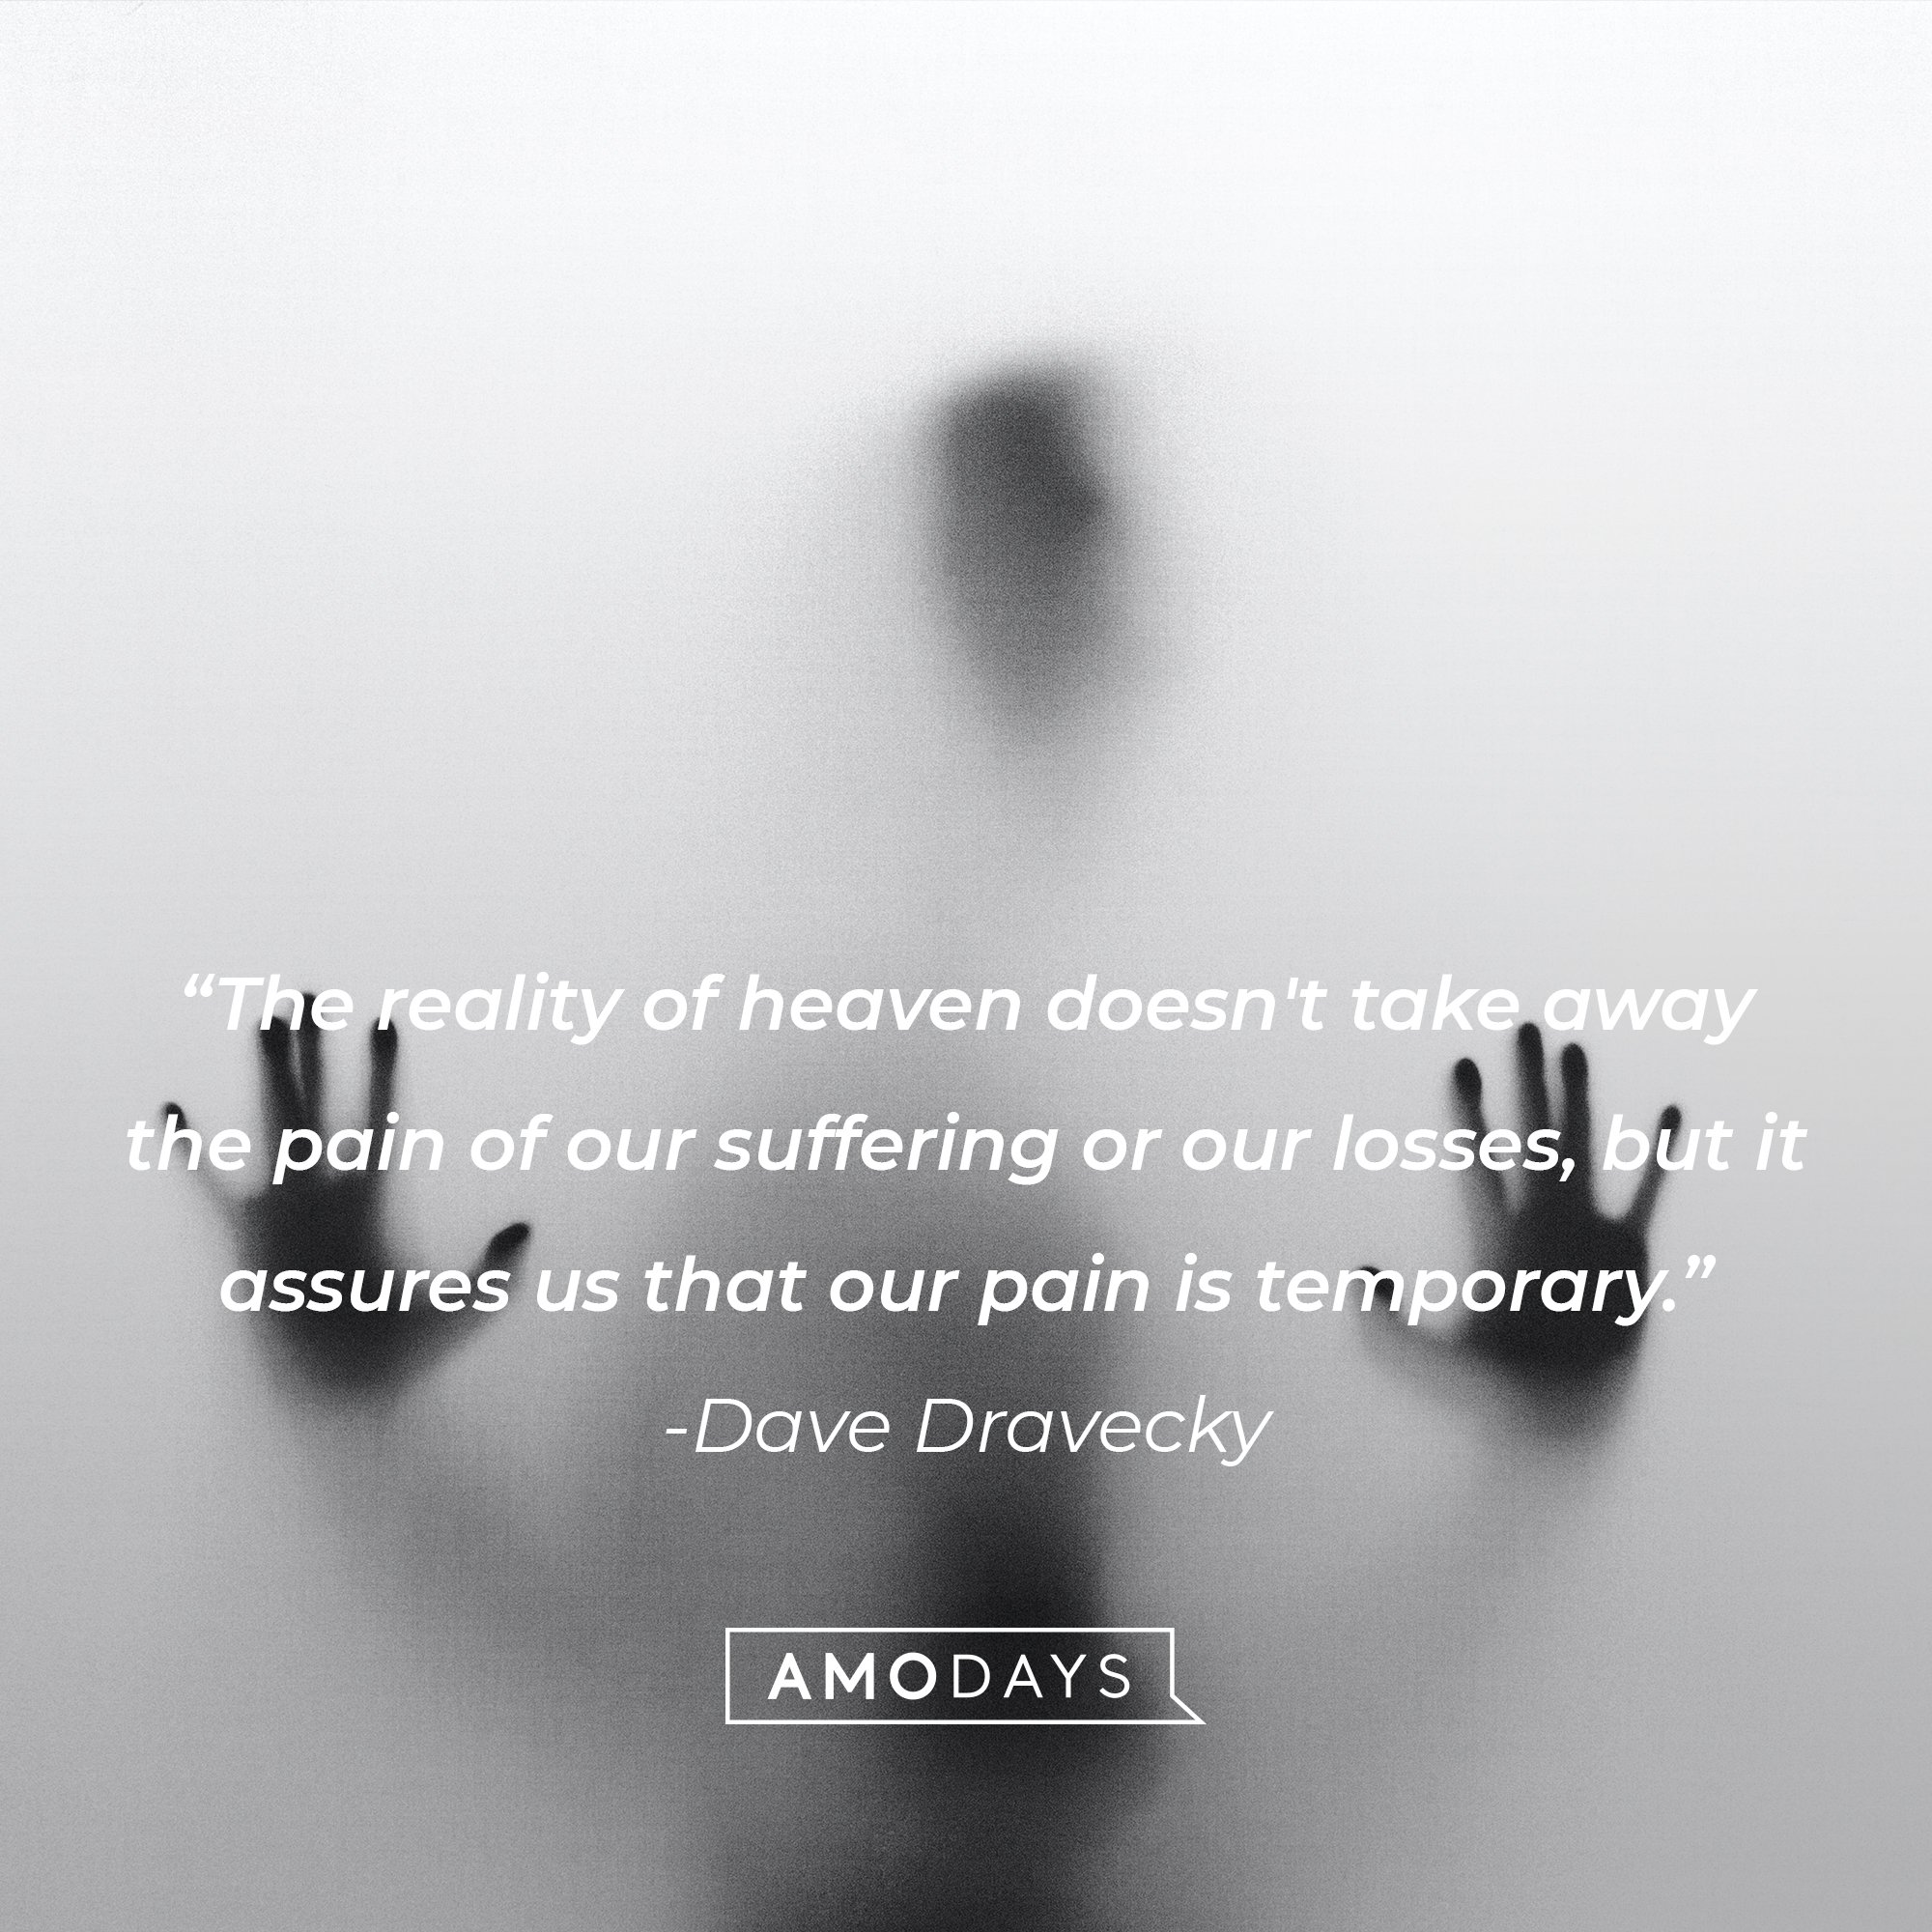 Dave Dravecky's quote: "The reality of heaven doesn't take away the pain of or suffering or our losses, but it assures us that our pain is temporary." | Image: AmoDays